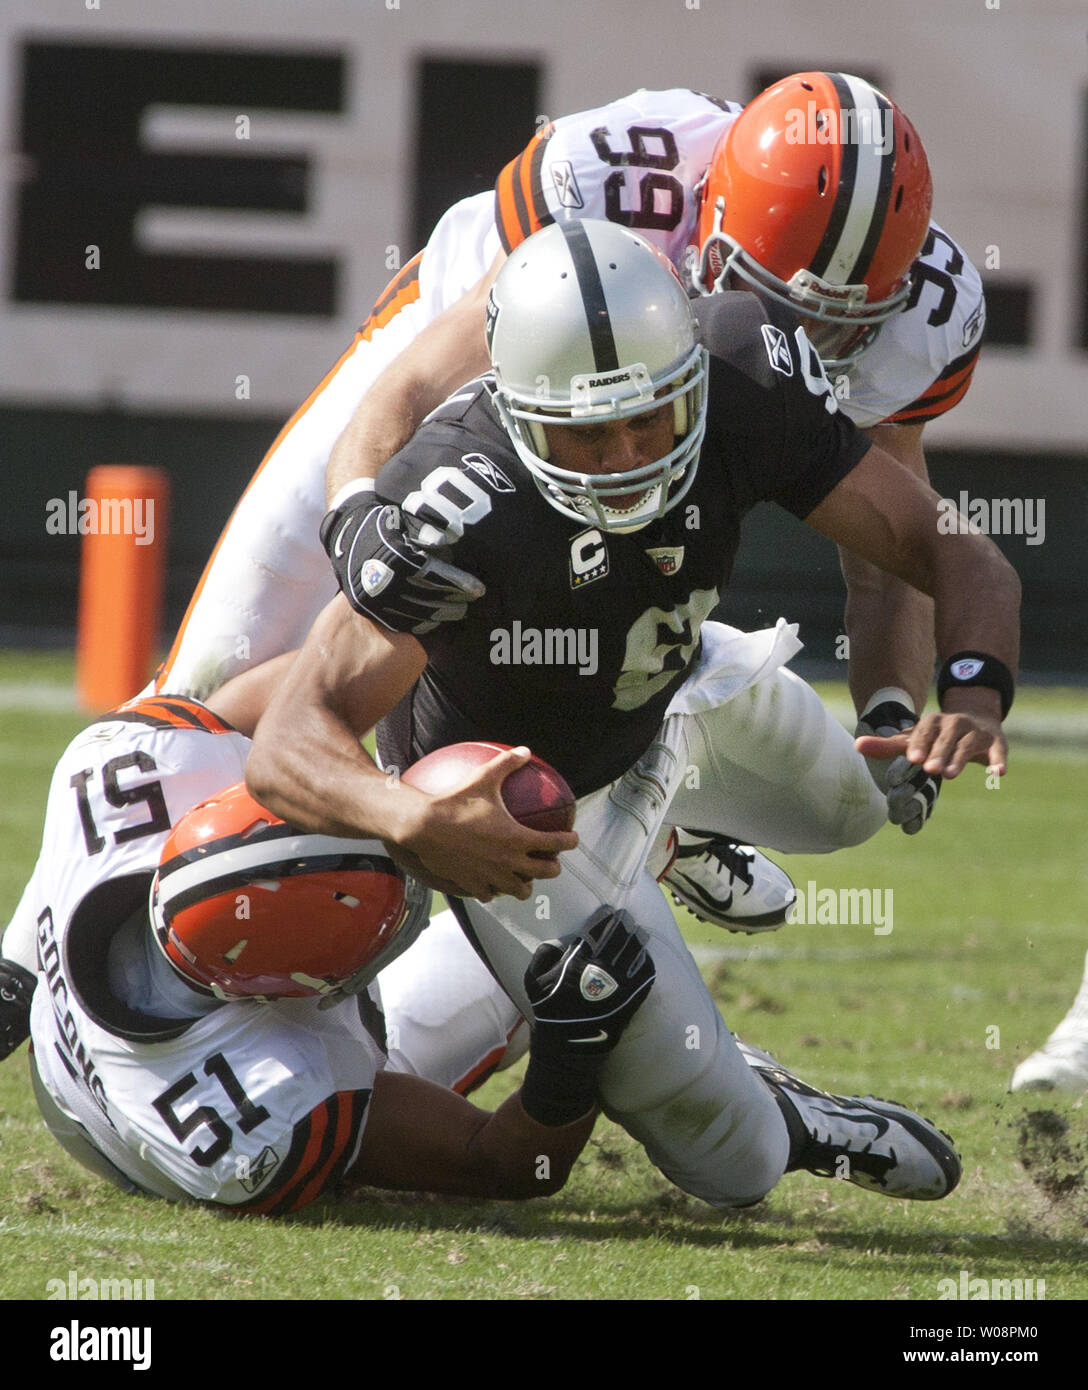 Oakland Raiders QB Jason Campbell is tackled by Cleveland Browns Chris Gocong (51) and Scott Fujita (99) in a play that resulted in Campbell breaking his collarbone at the Coliseum in Oakland, California on October 16, 2011. The Raiders defeated the Browns 24-17.     UPI/Terry Schmitt Stock Photo